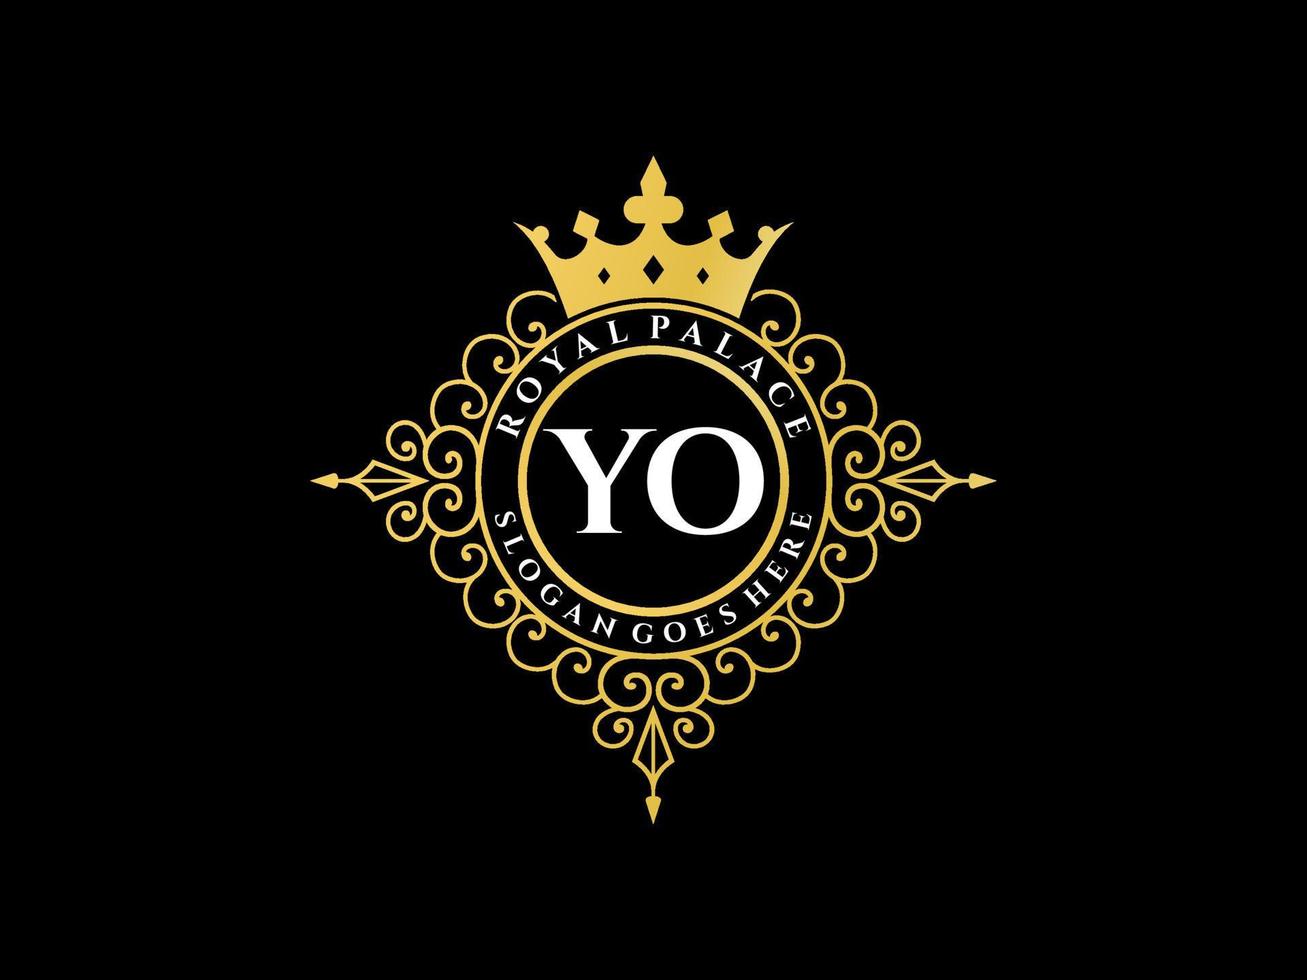 Letter YO Antique royal luxury victorian logo with ornamental frame. vector